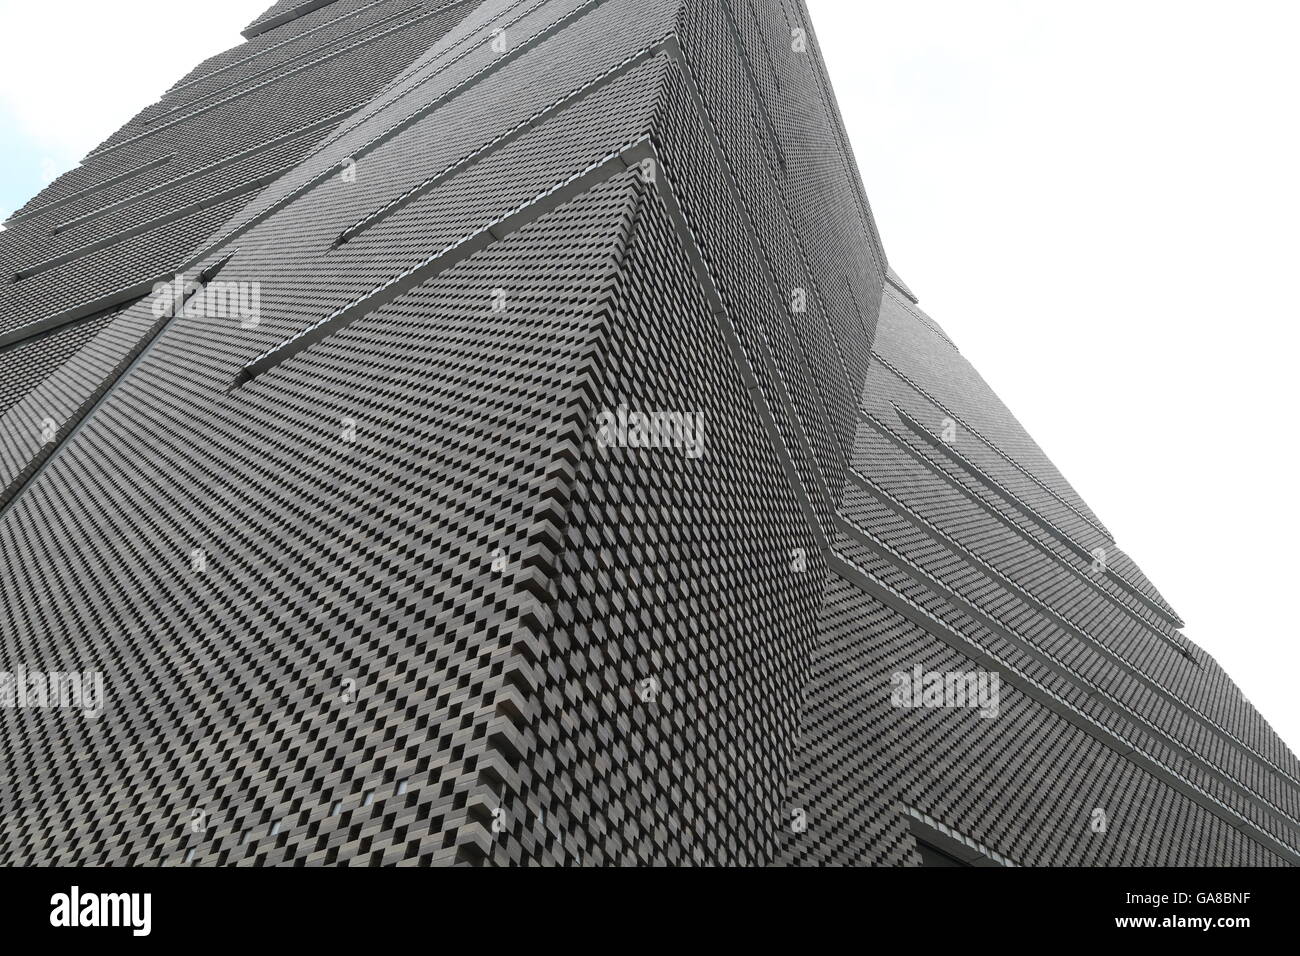 Sharp lines and angles define the design of the new wing of Tate Modern in London. Stock Photo